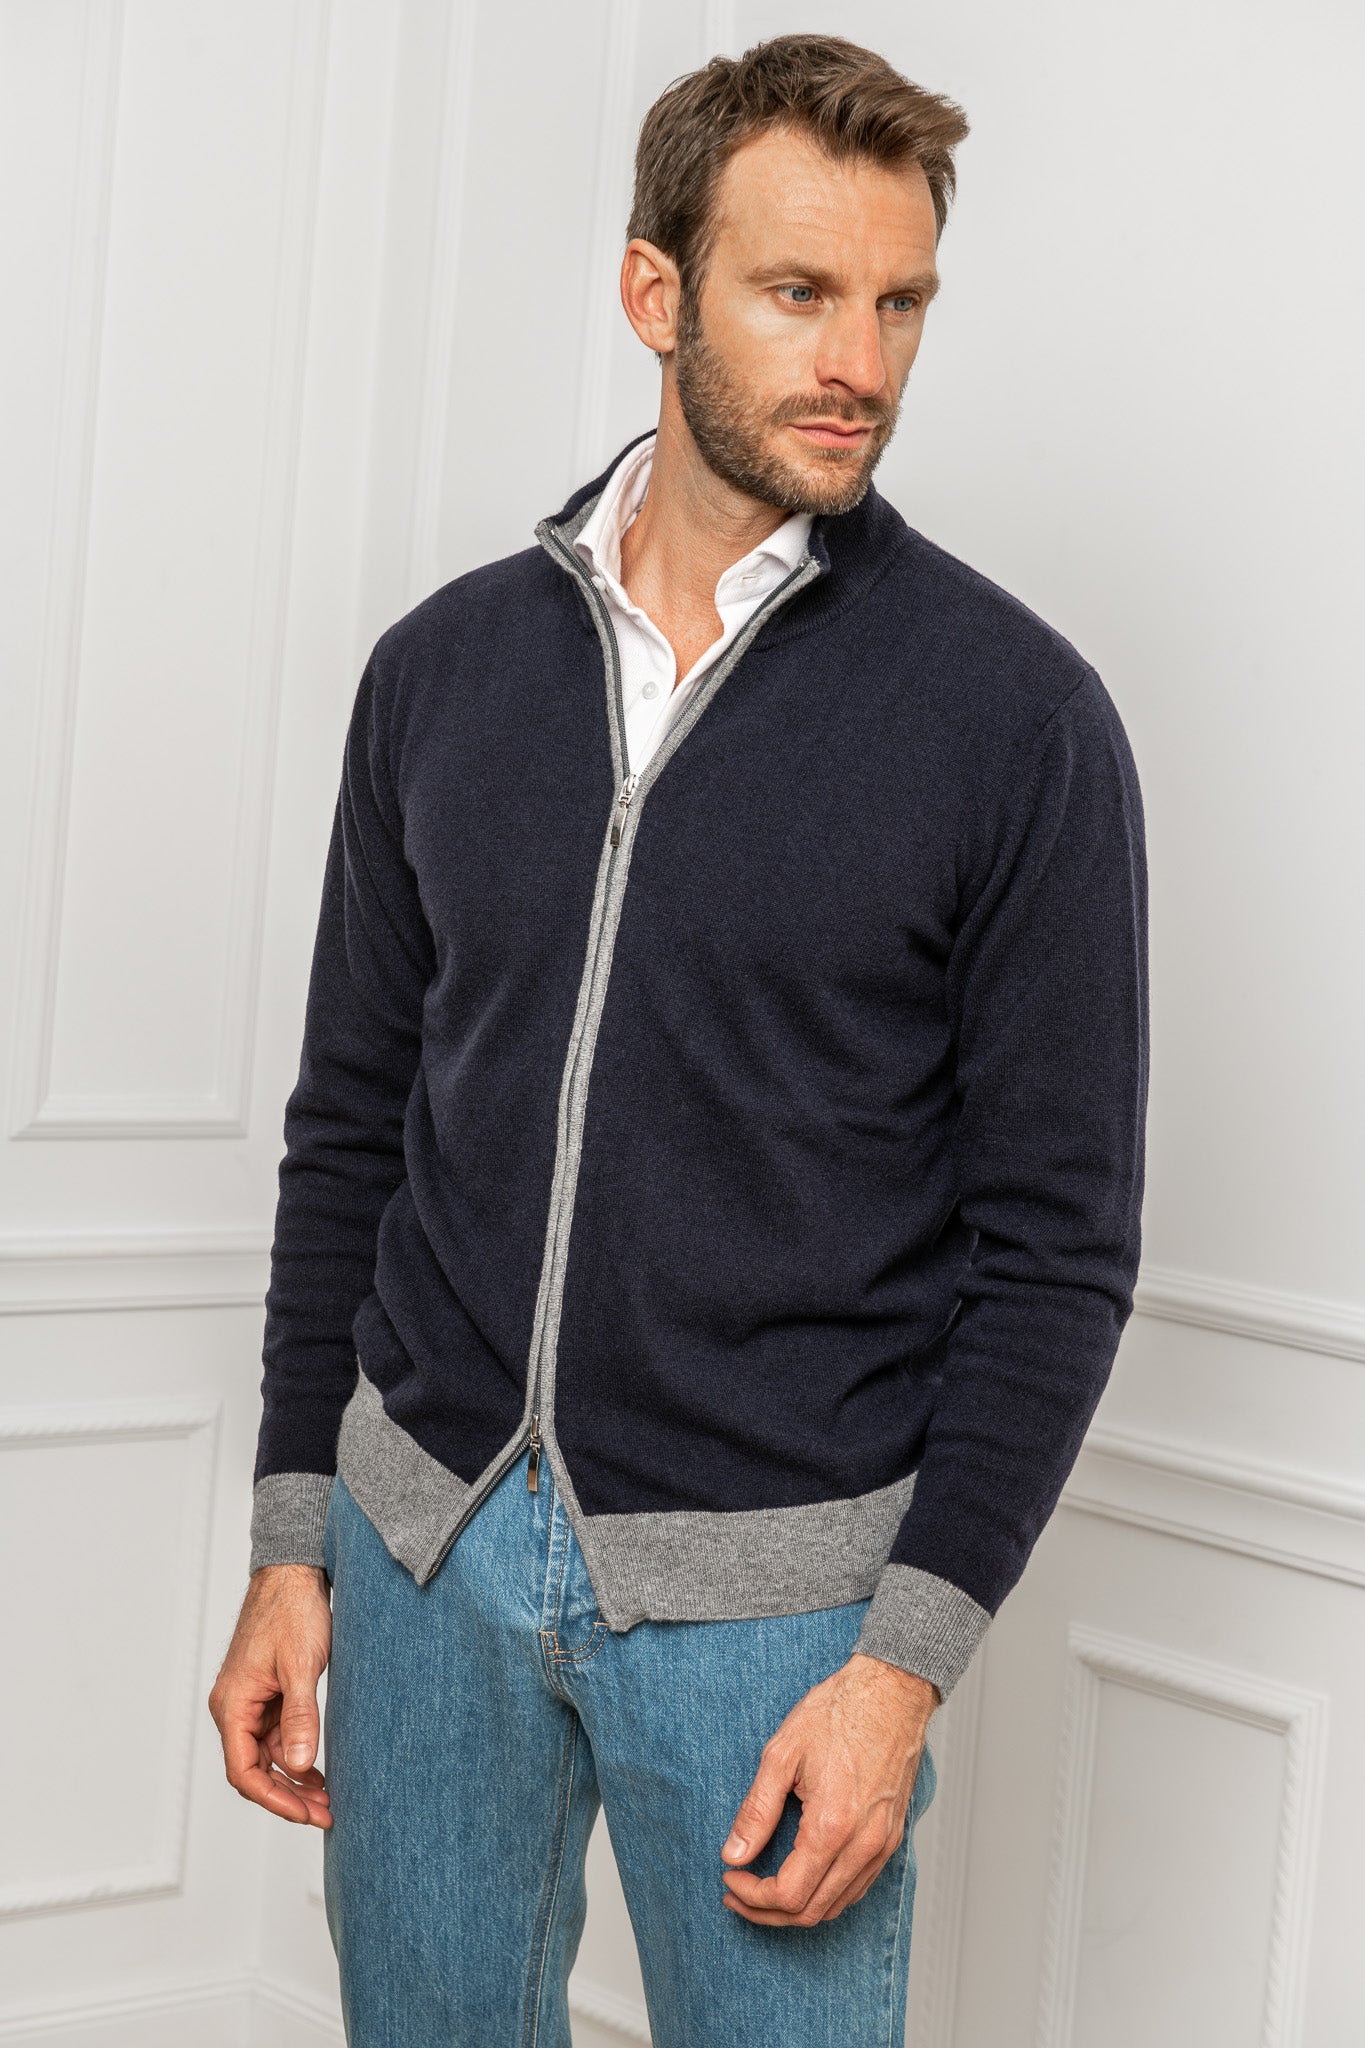 Blue and grey full zip cardigan | Made in Italy | Pini Parma